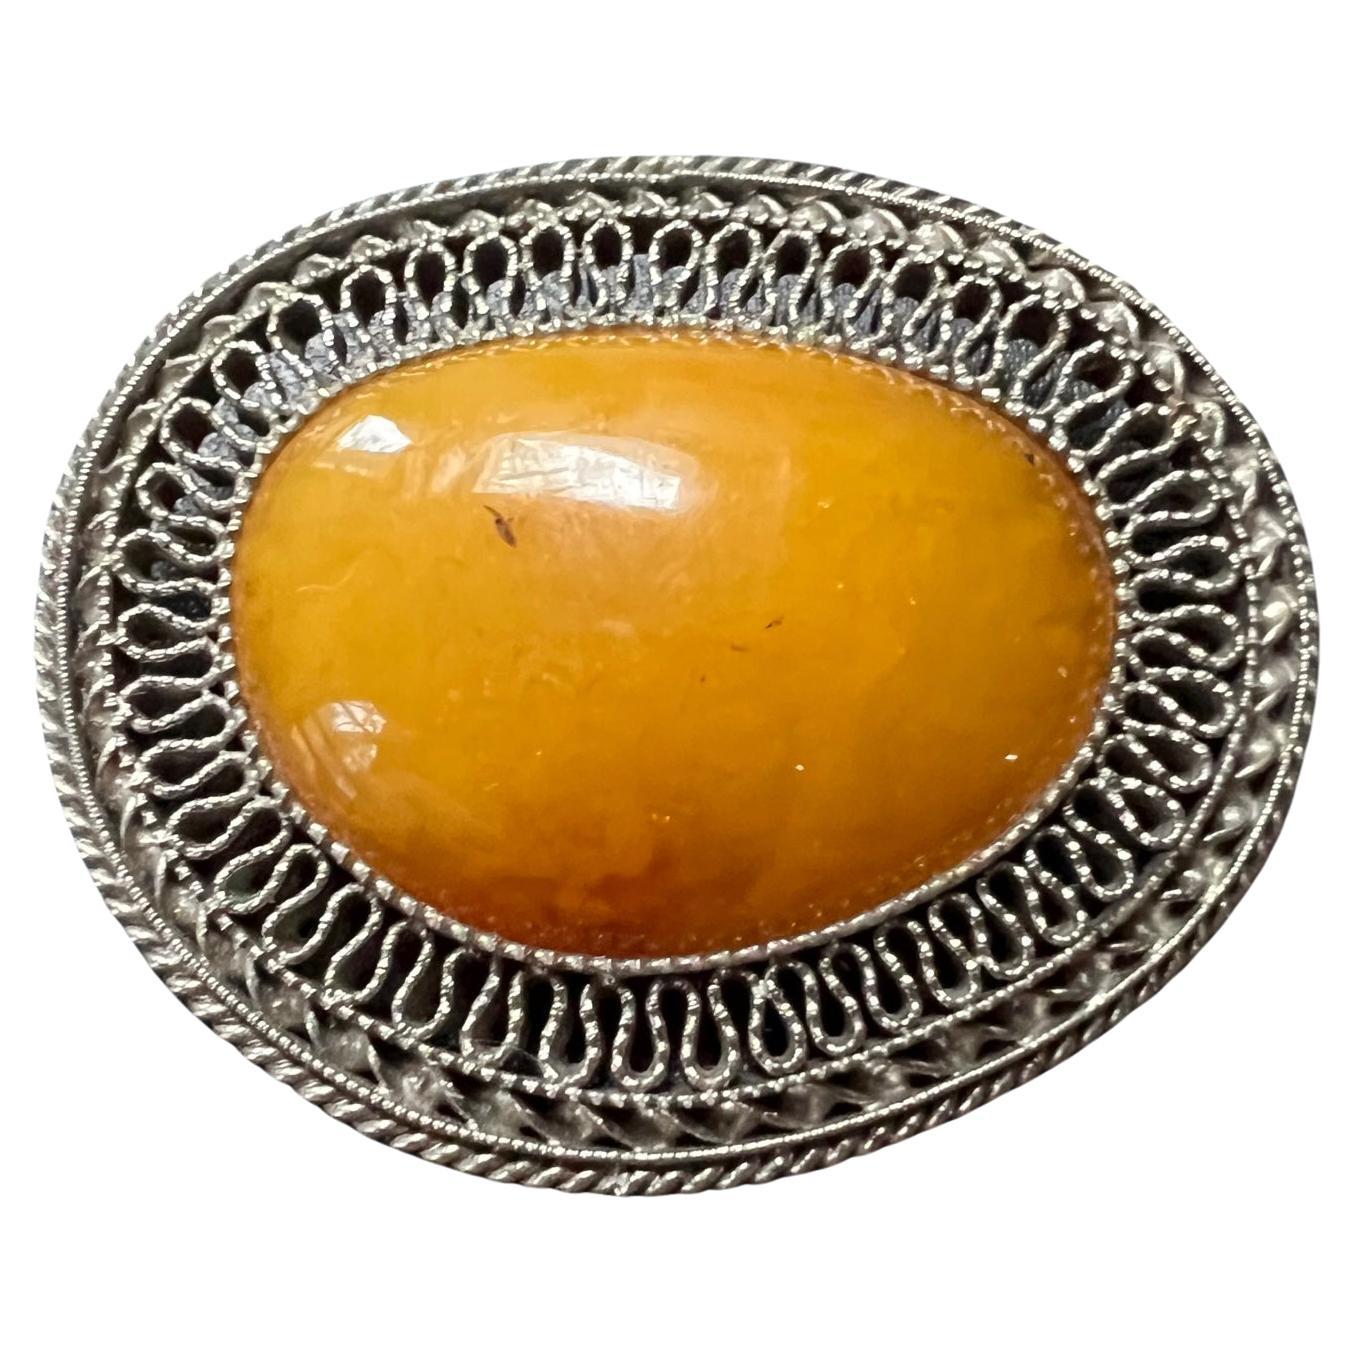 Large Rare Vintage Early 1900s Amber Brooch from Latvia